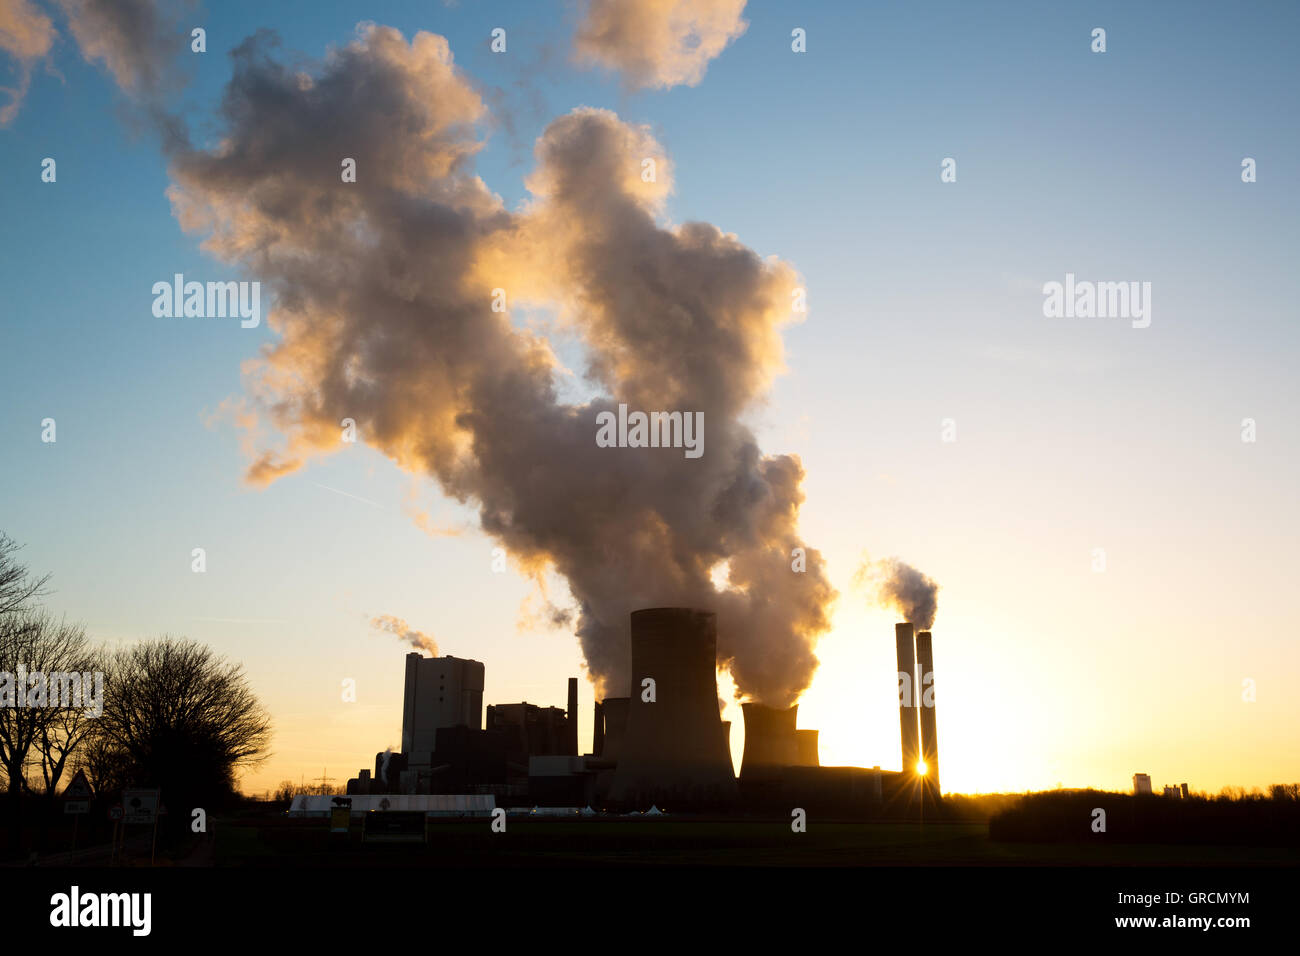 Coal Power Plant Niederaussem Nrw With Refugee Accommodation In Backlight Stock Photo